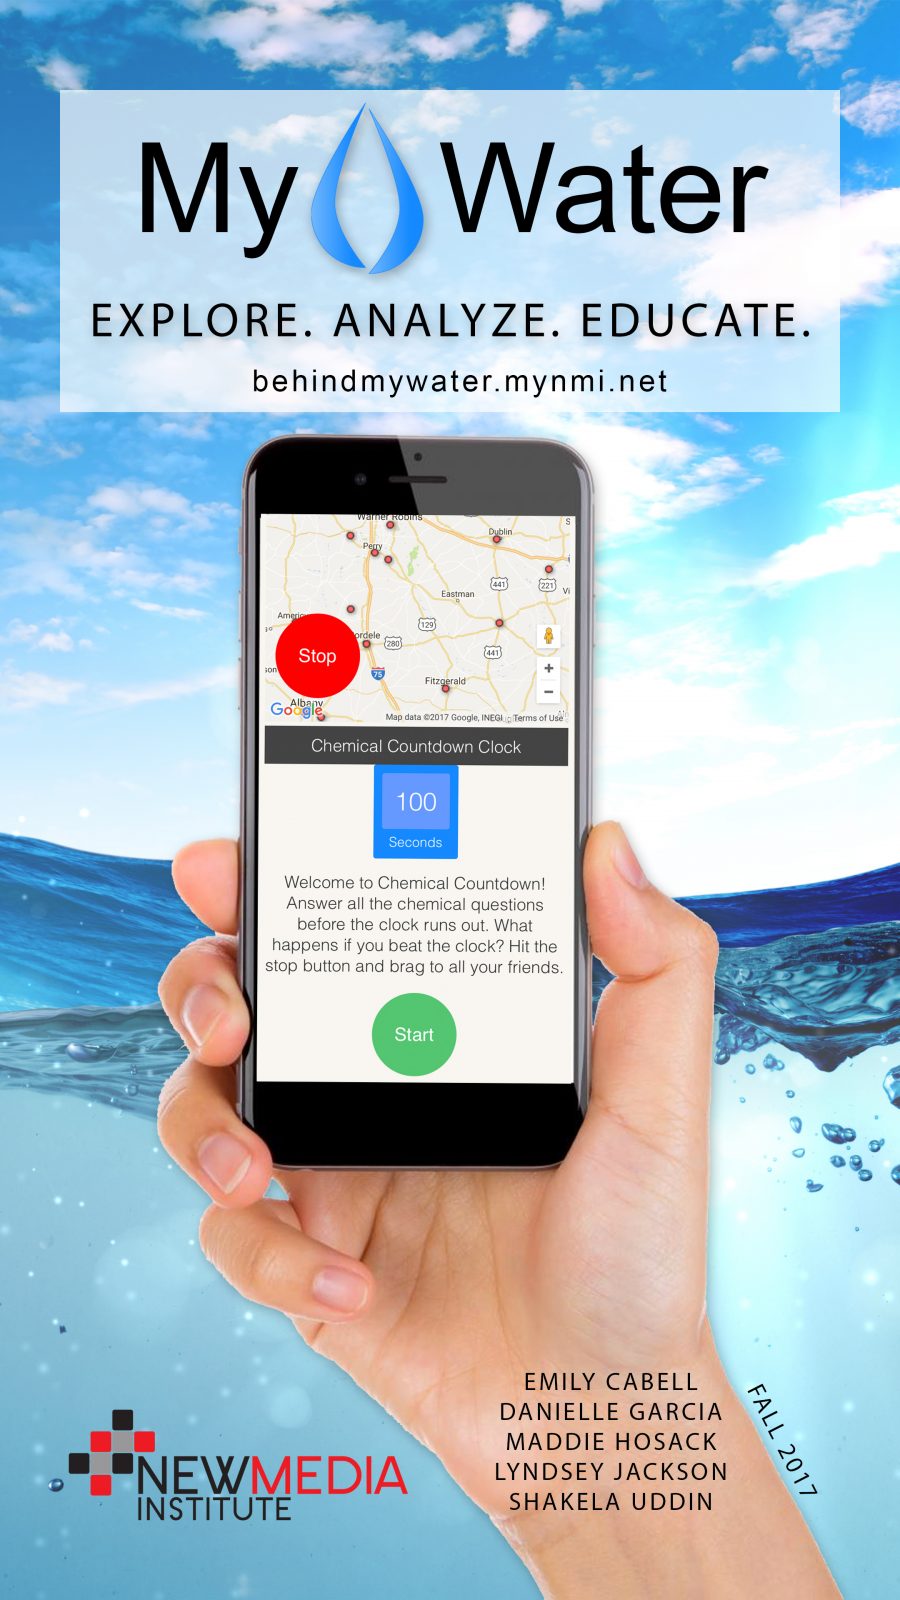 MyWater